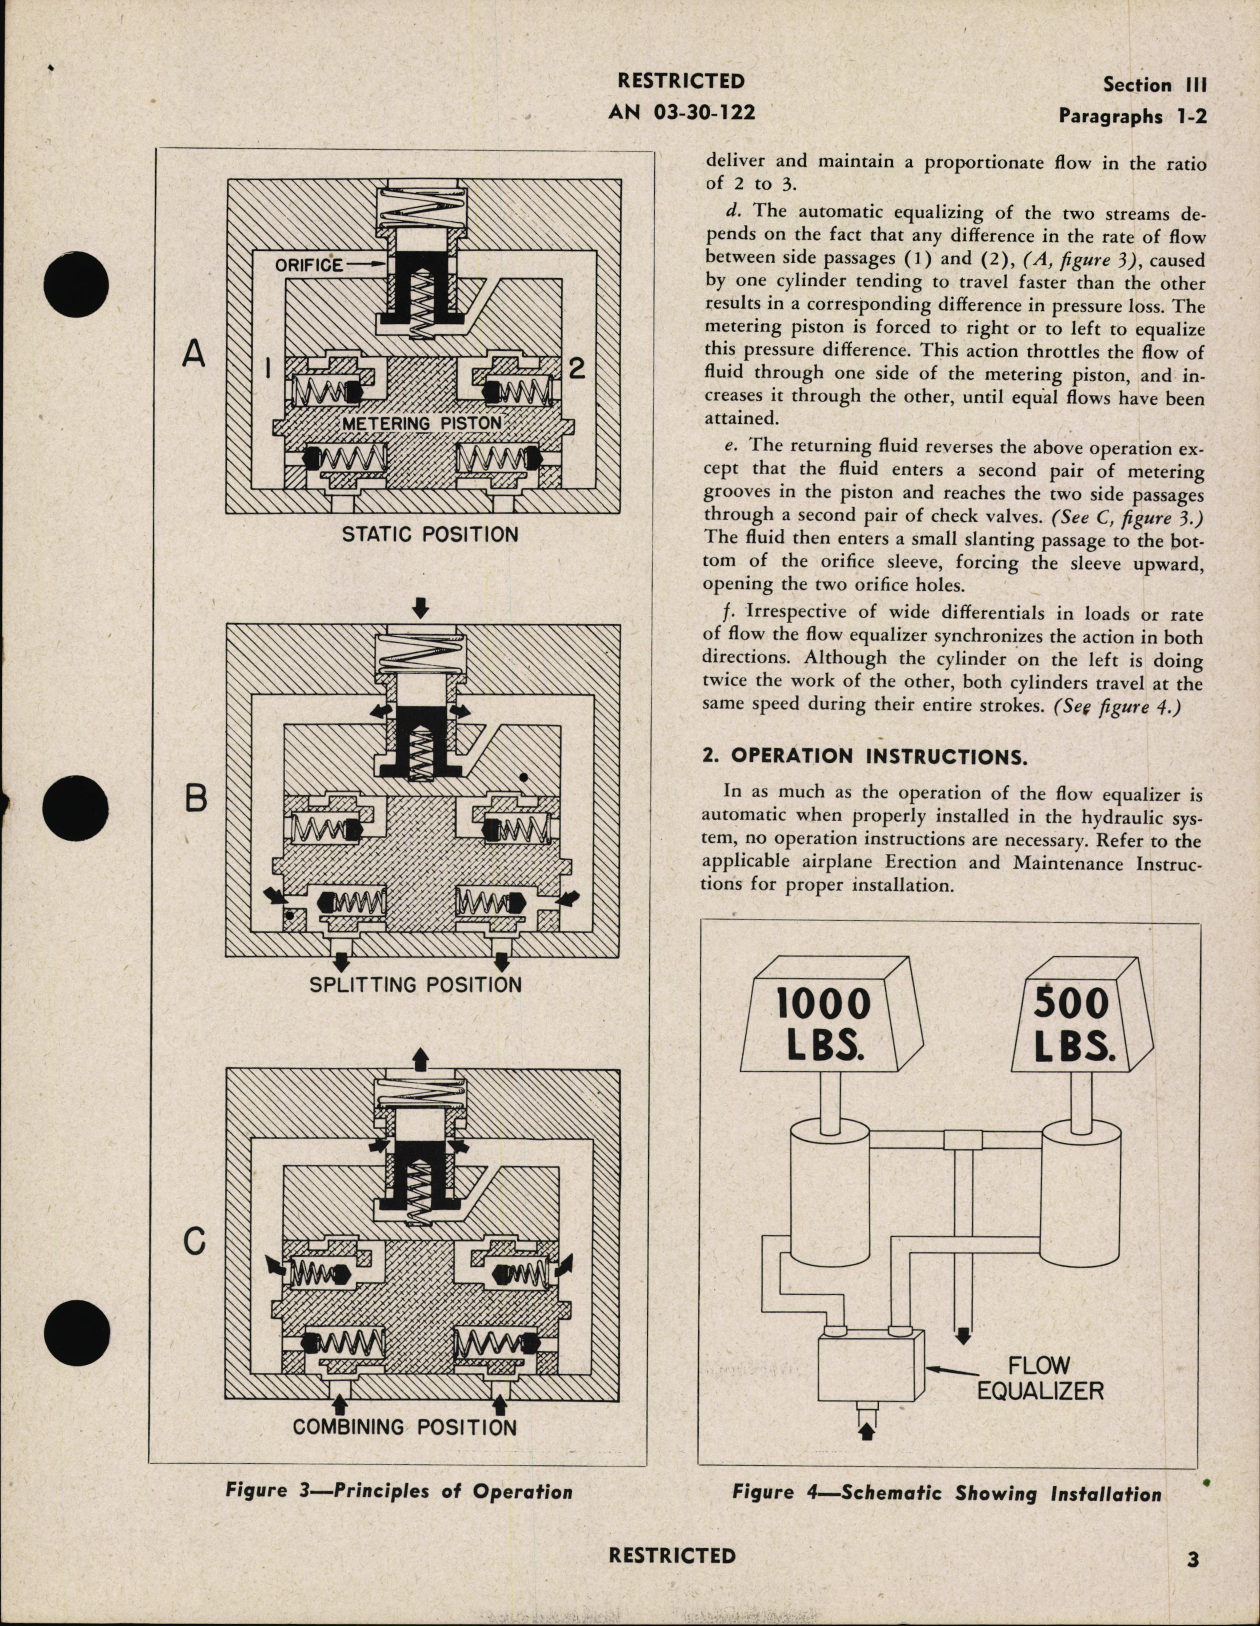 Sample page 7 from AirCorps Library document: Handbook of Overhaul Instructions with Parts Catalog for Hydraulic Flow Equalizer and Proportioner